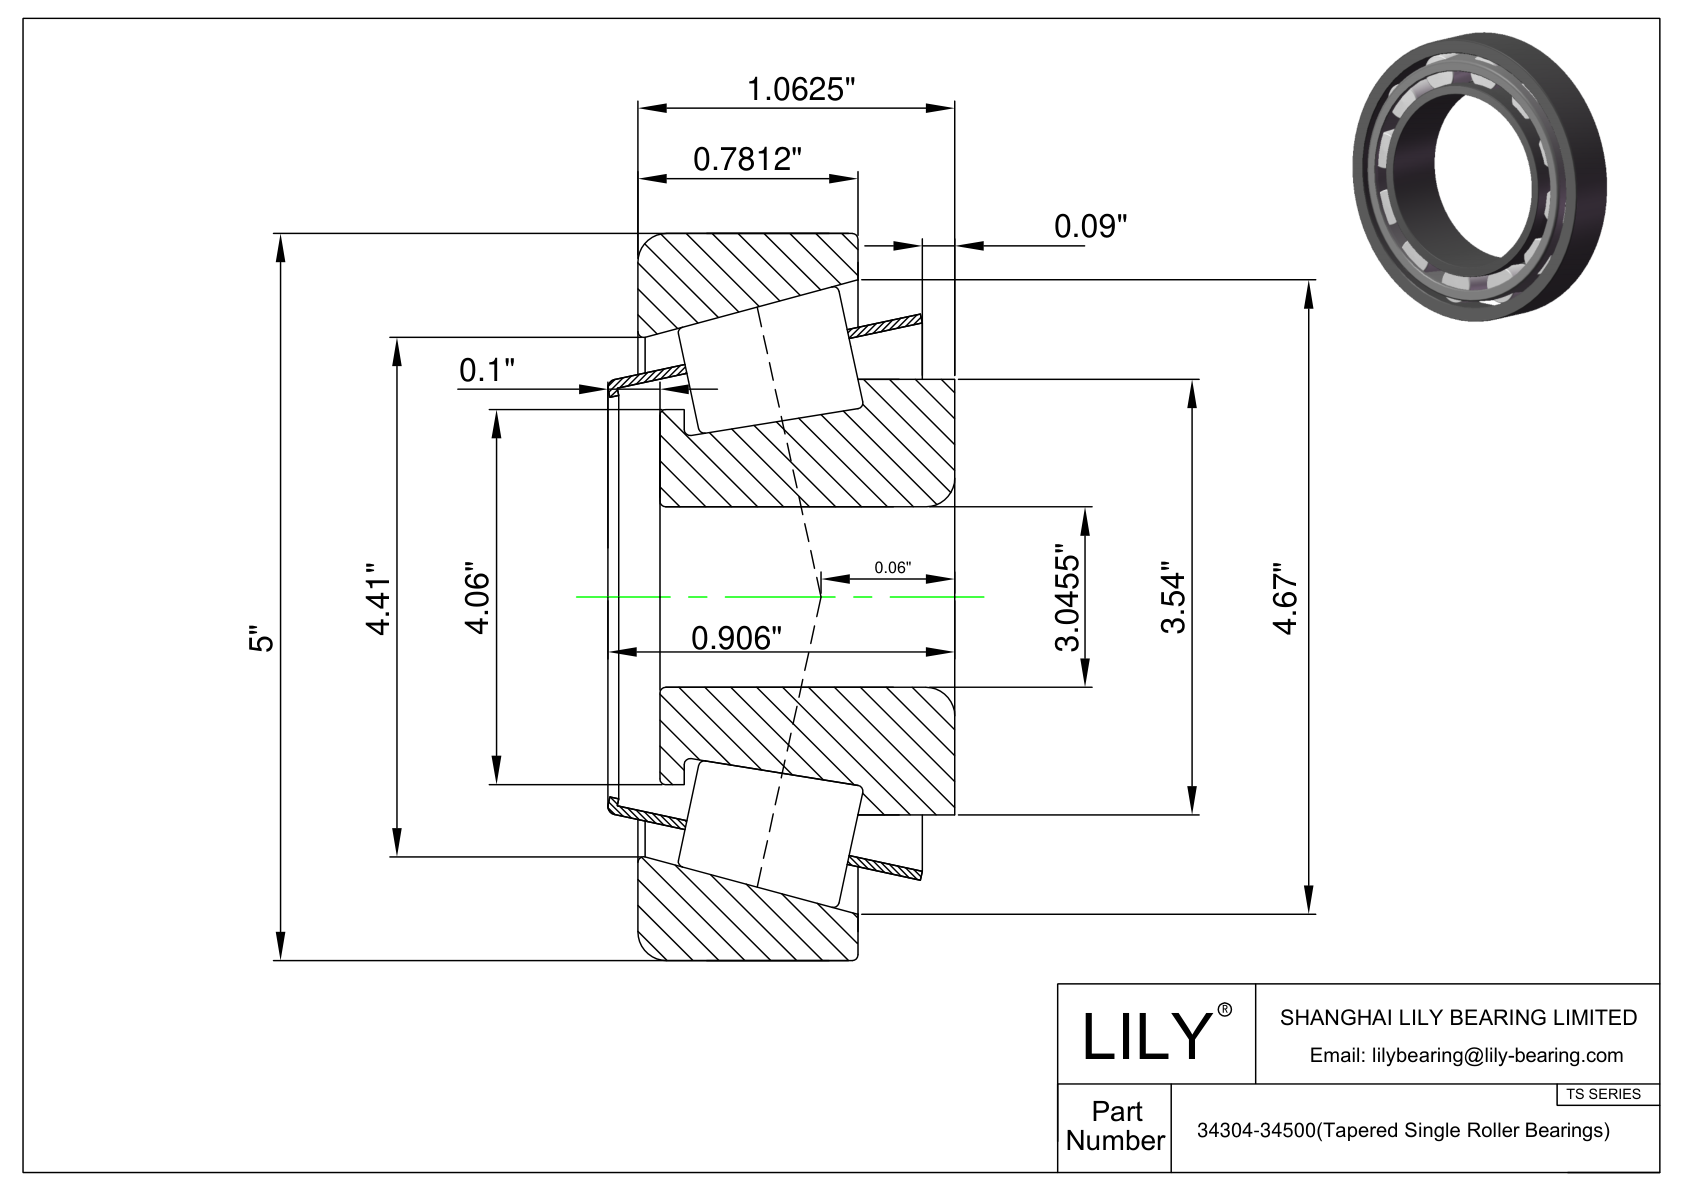 34304-34500 TS (Tapered Single Roller Bearings) (Imperial) cad drawing